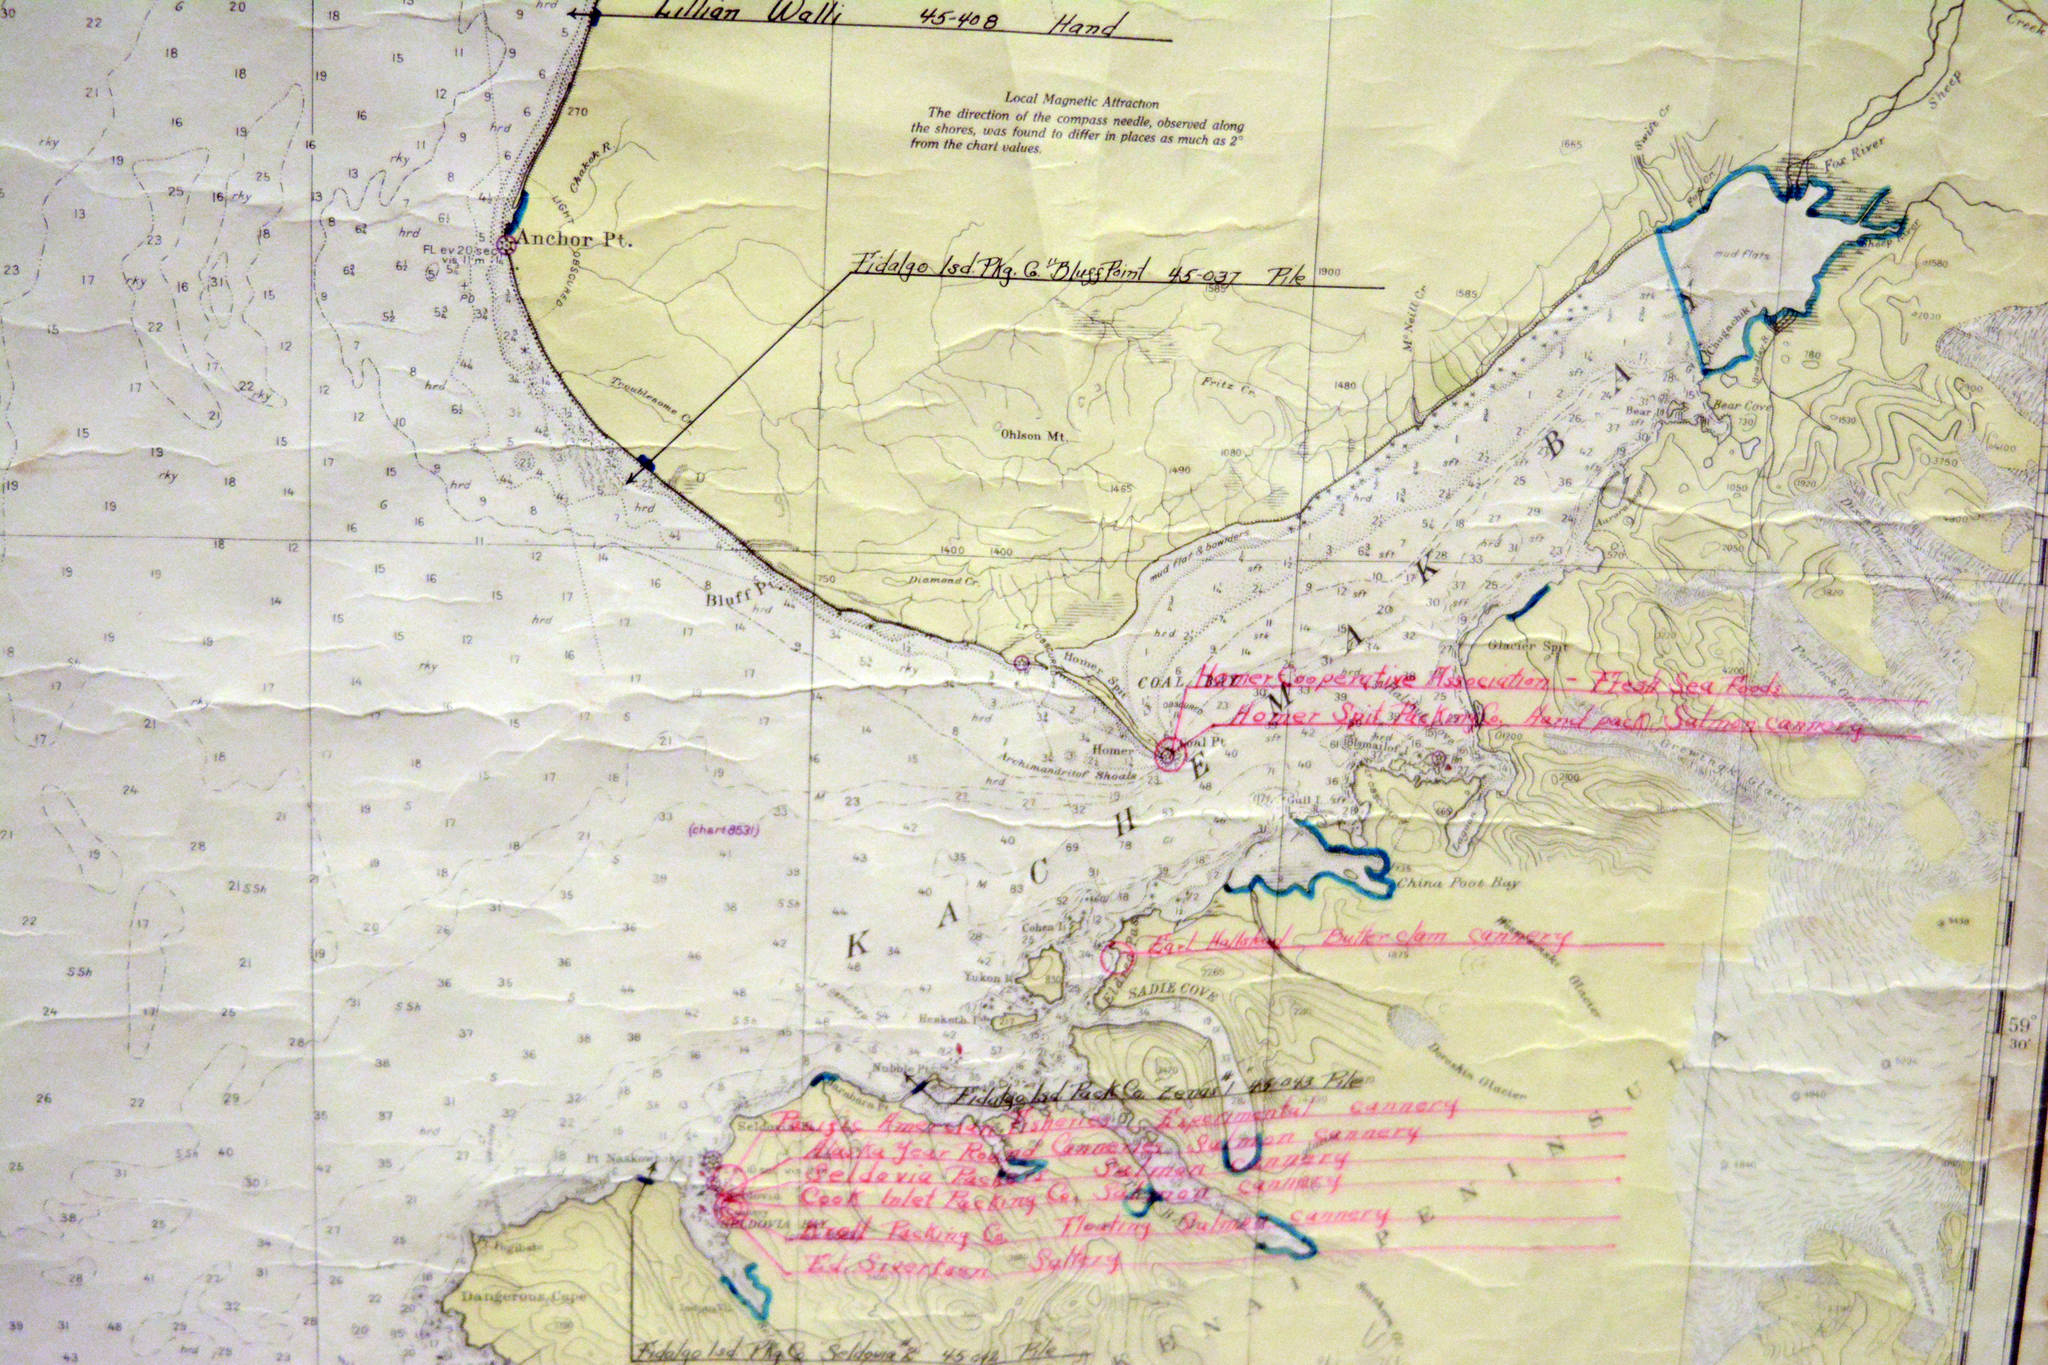 This 1944 map photographed Tuesday, Aug. 22, 2017 from the Pratt Museum exhibit cARTography includes notations showing areas open to fish traps (the areas with the blue lines) as well as locations of Kachemak Bay and Cook Inlet canneries. (Photo by Michael Armstrong, Homer News)